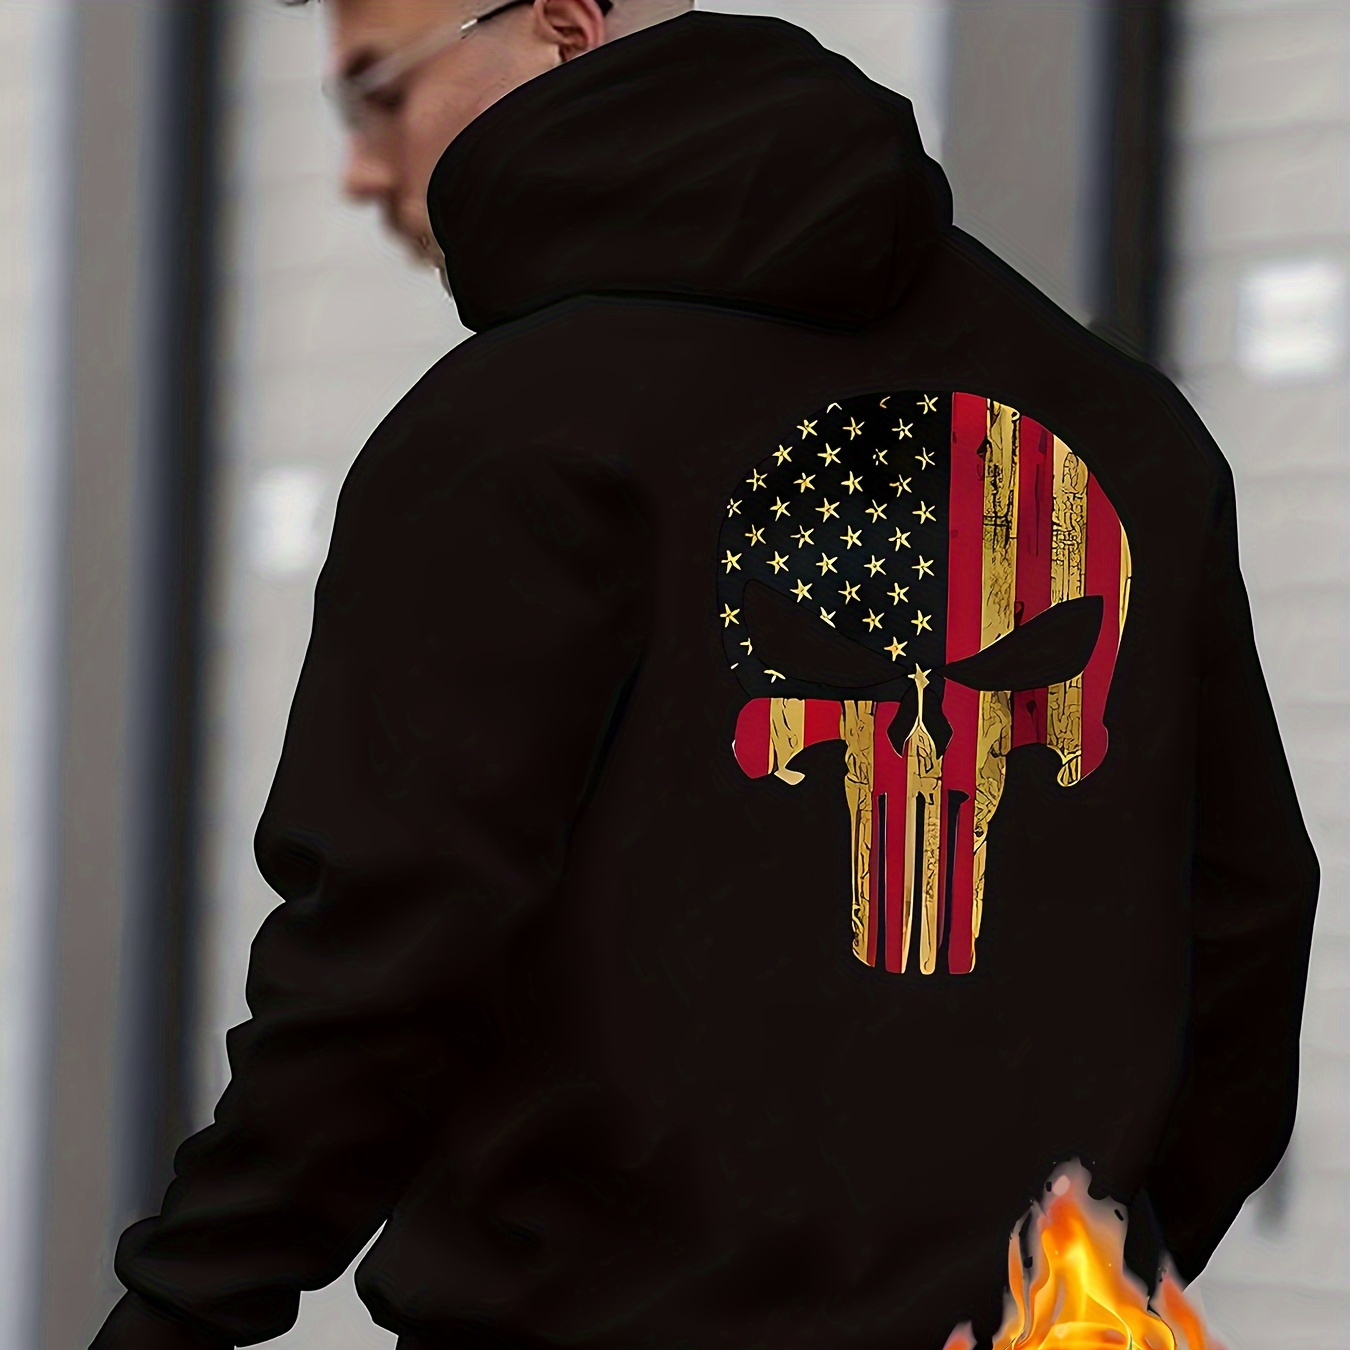 

Scary Skull In American National Flag Style Graphic Print Hoodie, Cool Sweatshirt For Men, Men's Casual Hooded Pullover Streetwear Clothing For Spring Fall Winter, As Gifts